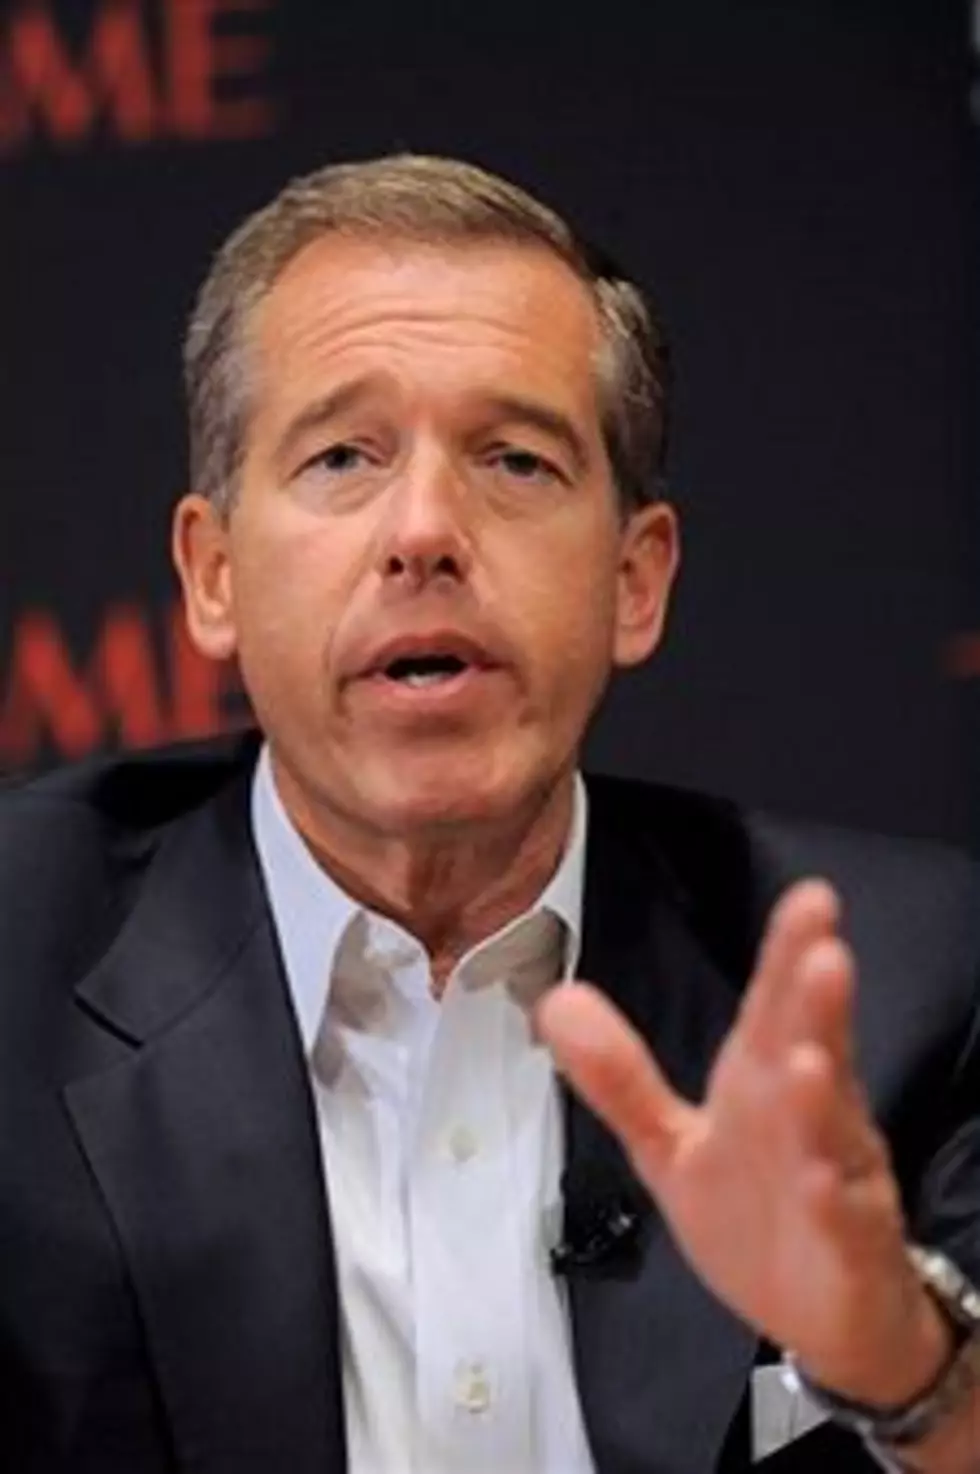 Is Brian Williams of NBC the Coolest Guy in the Room? [Video]